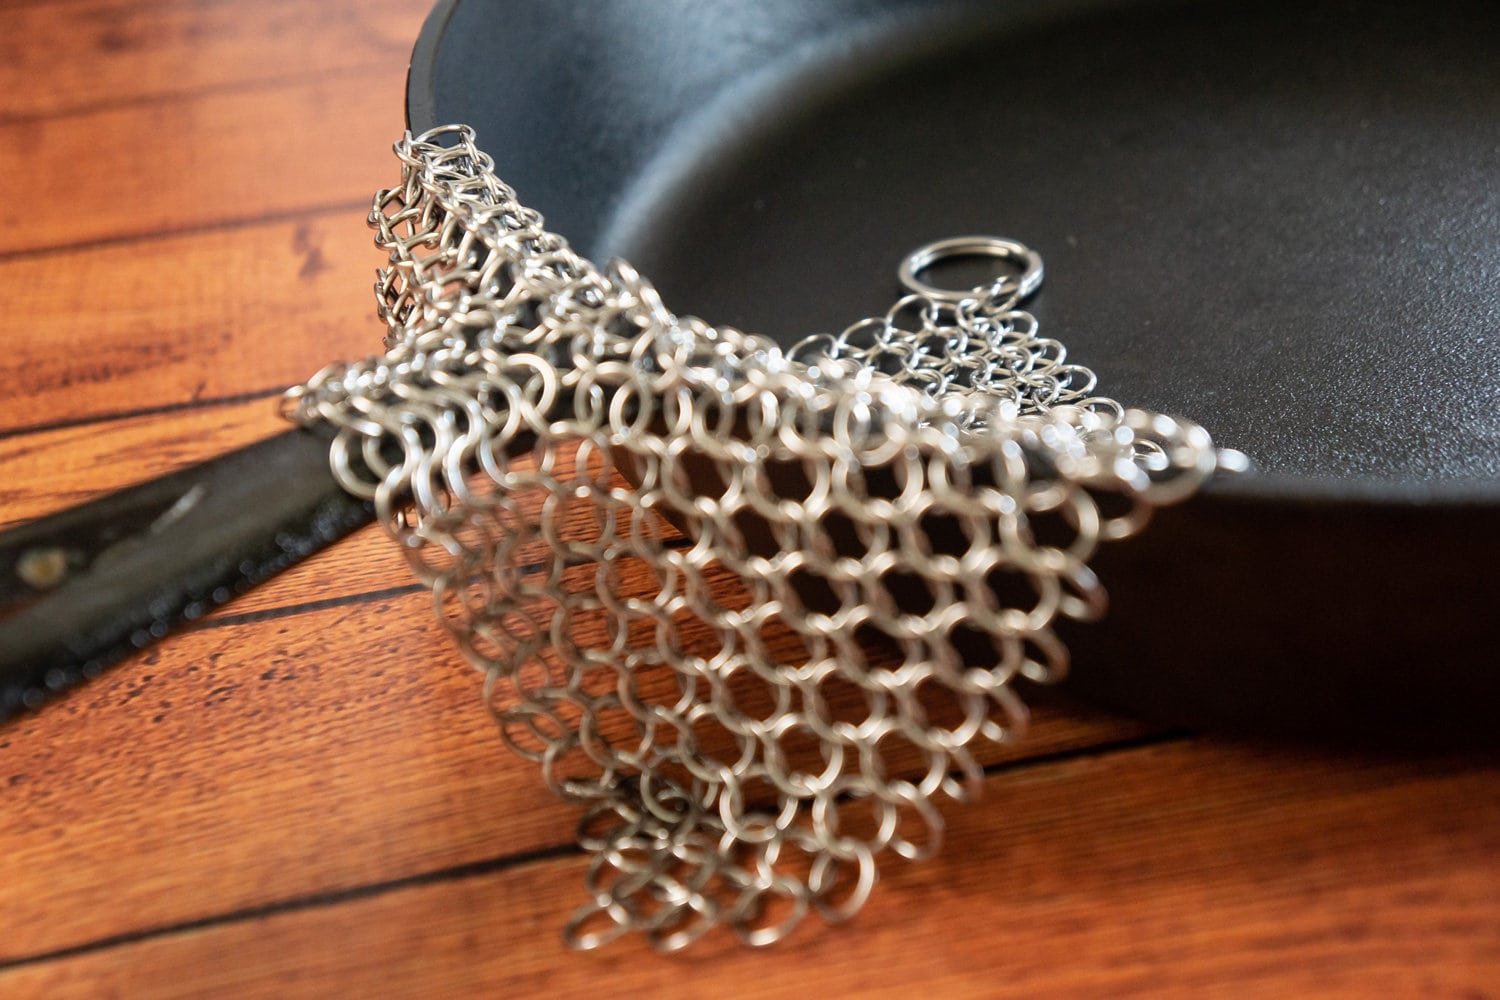 Small Ring Chainmail Scrubber - for Cast Iron, Stainless Steel, Hard Anodized Cookware and Other Pots & Pans. For for Cast Iron Cookware, Dutch Ovens, Casseroles, Stainless Steel Cookware, Woks and more.